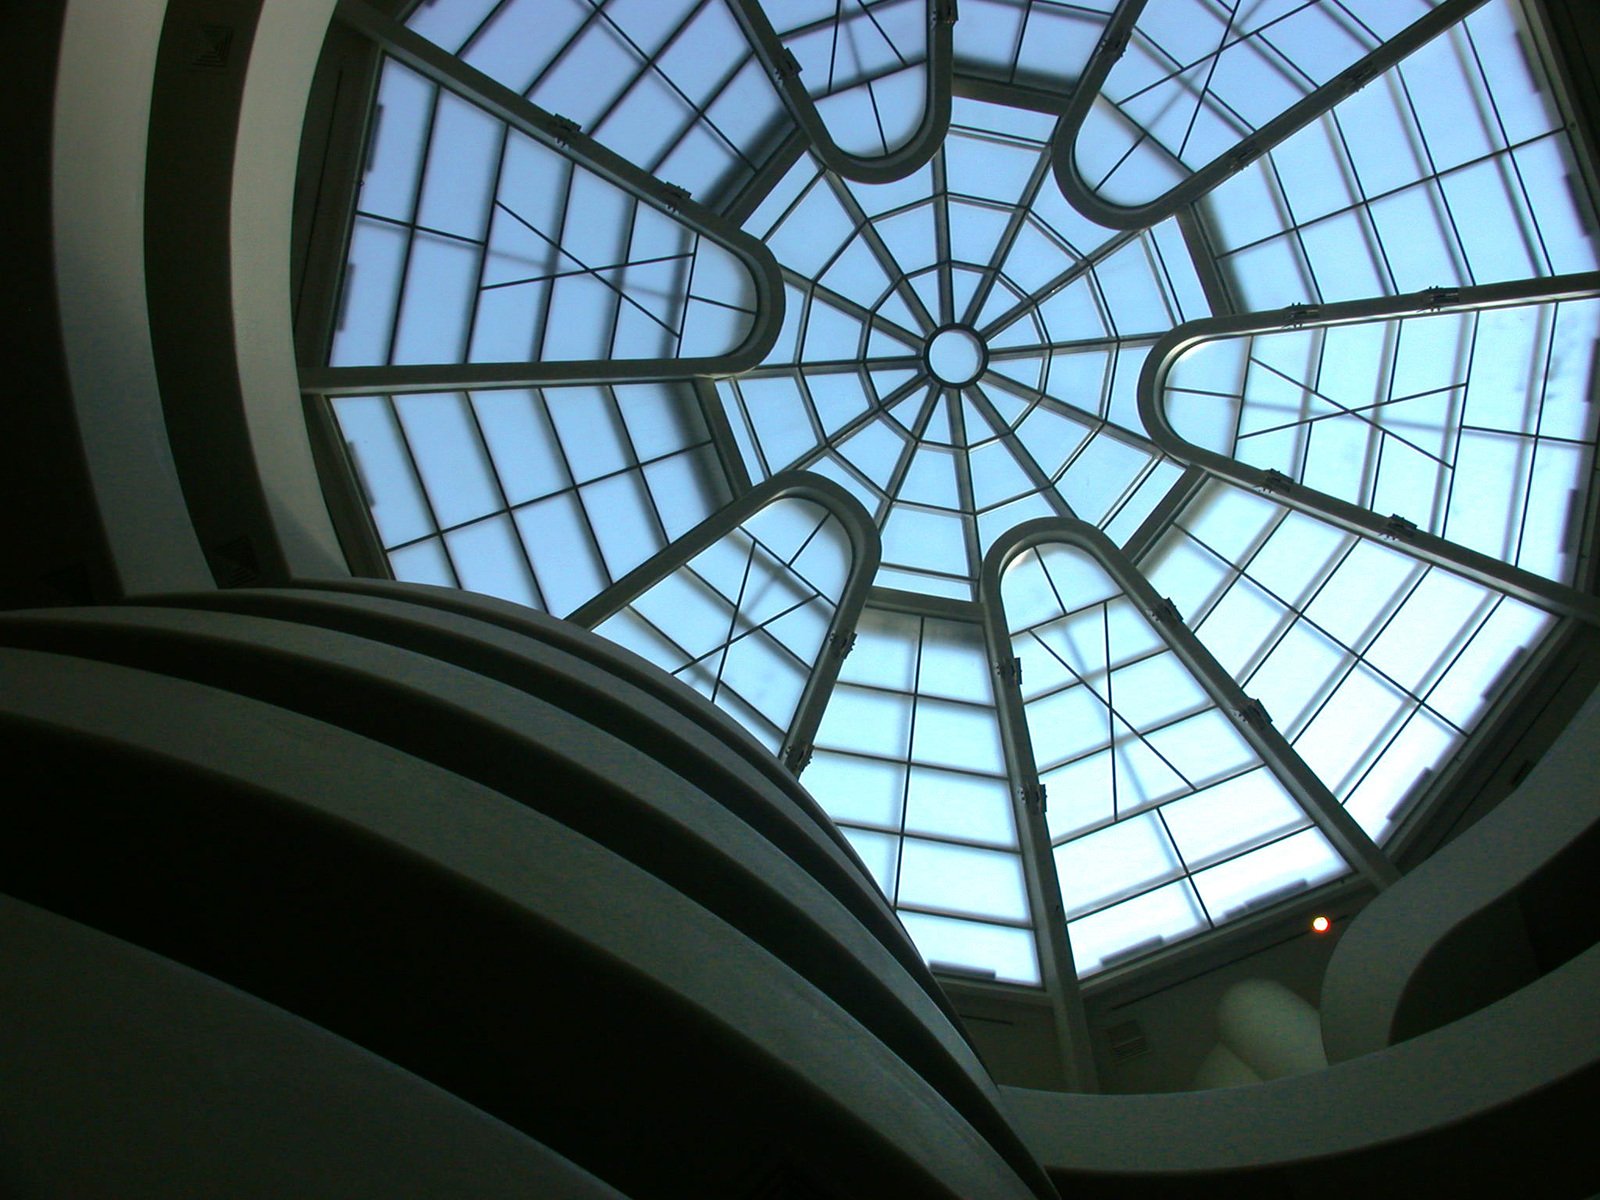 there is a view of an atrium looking into the window